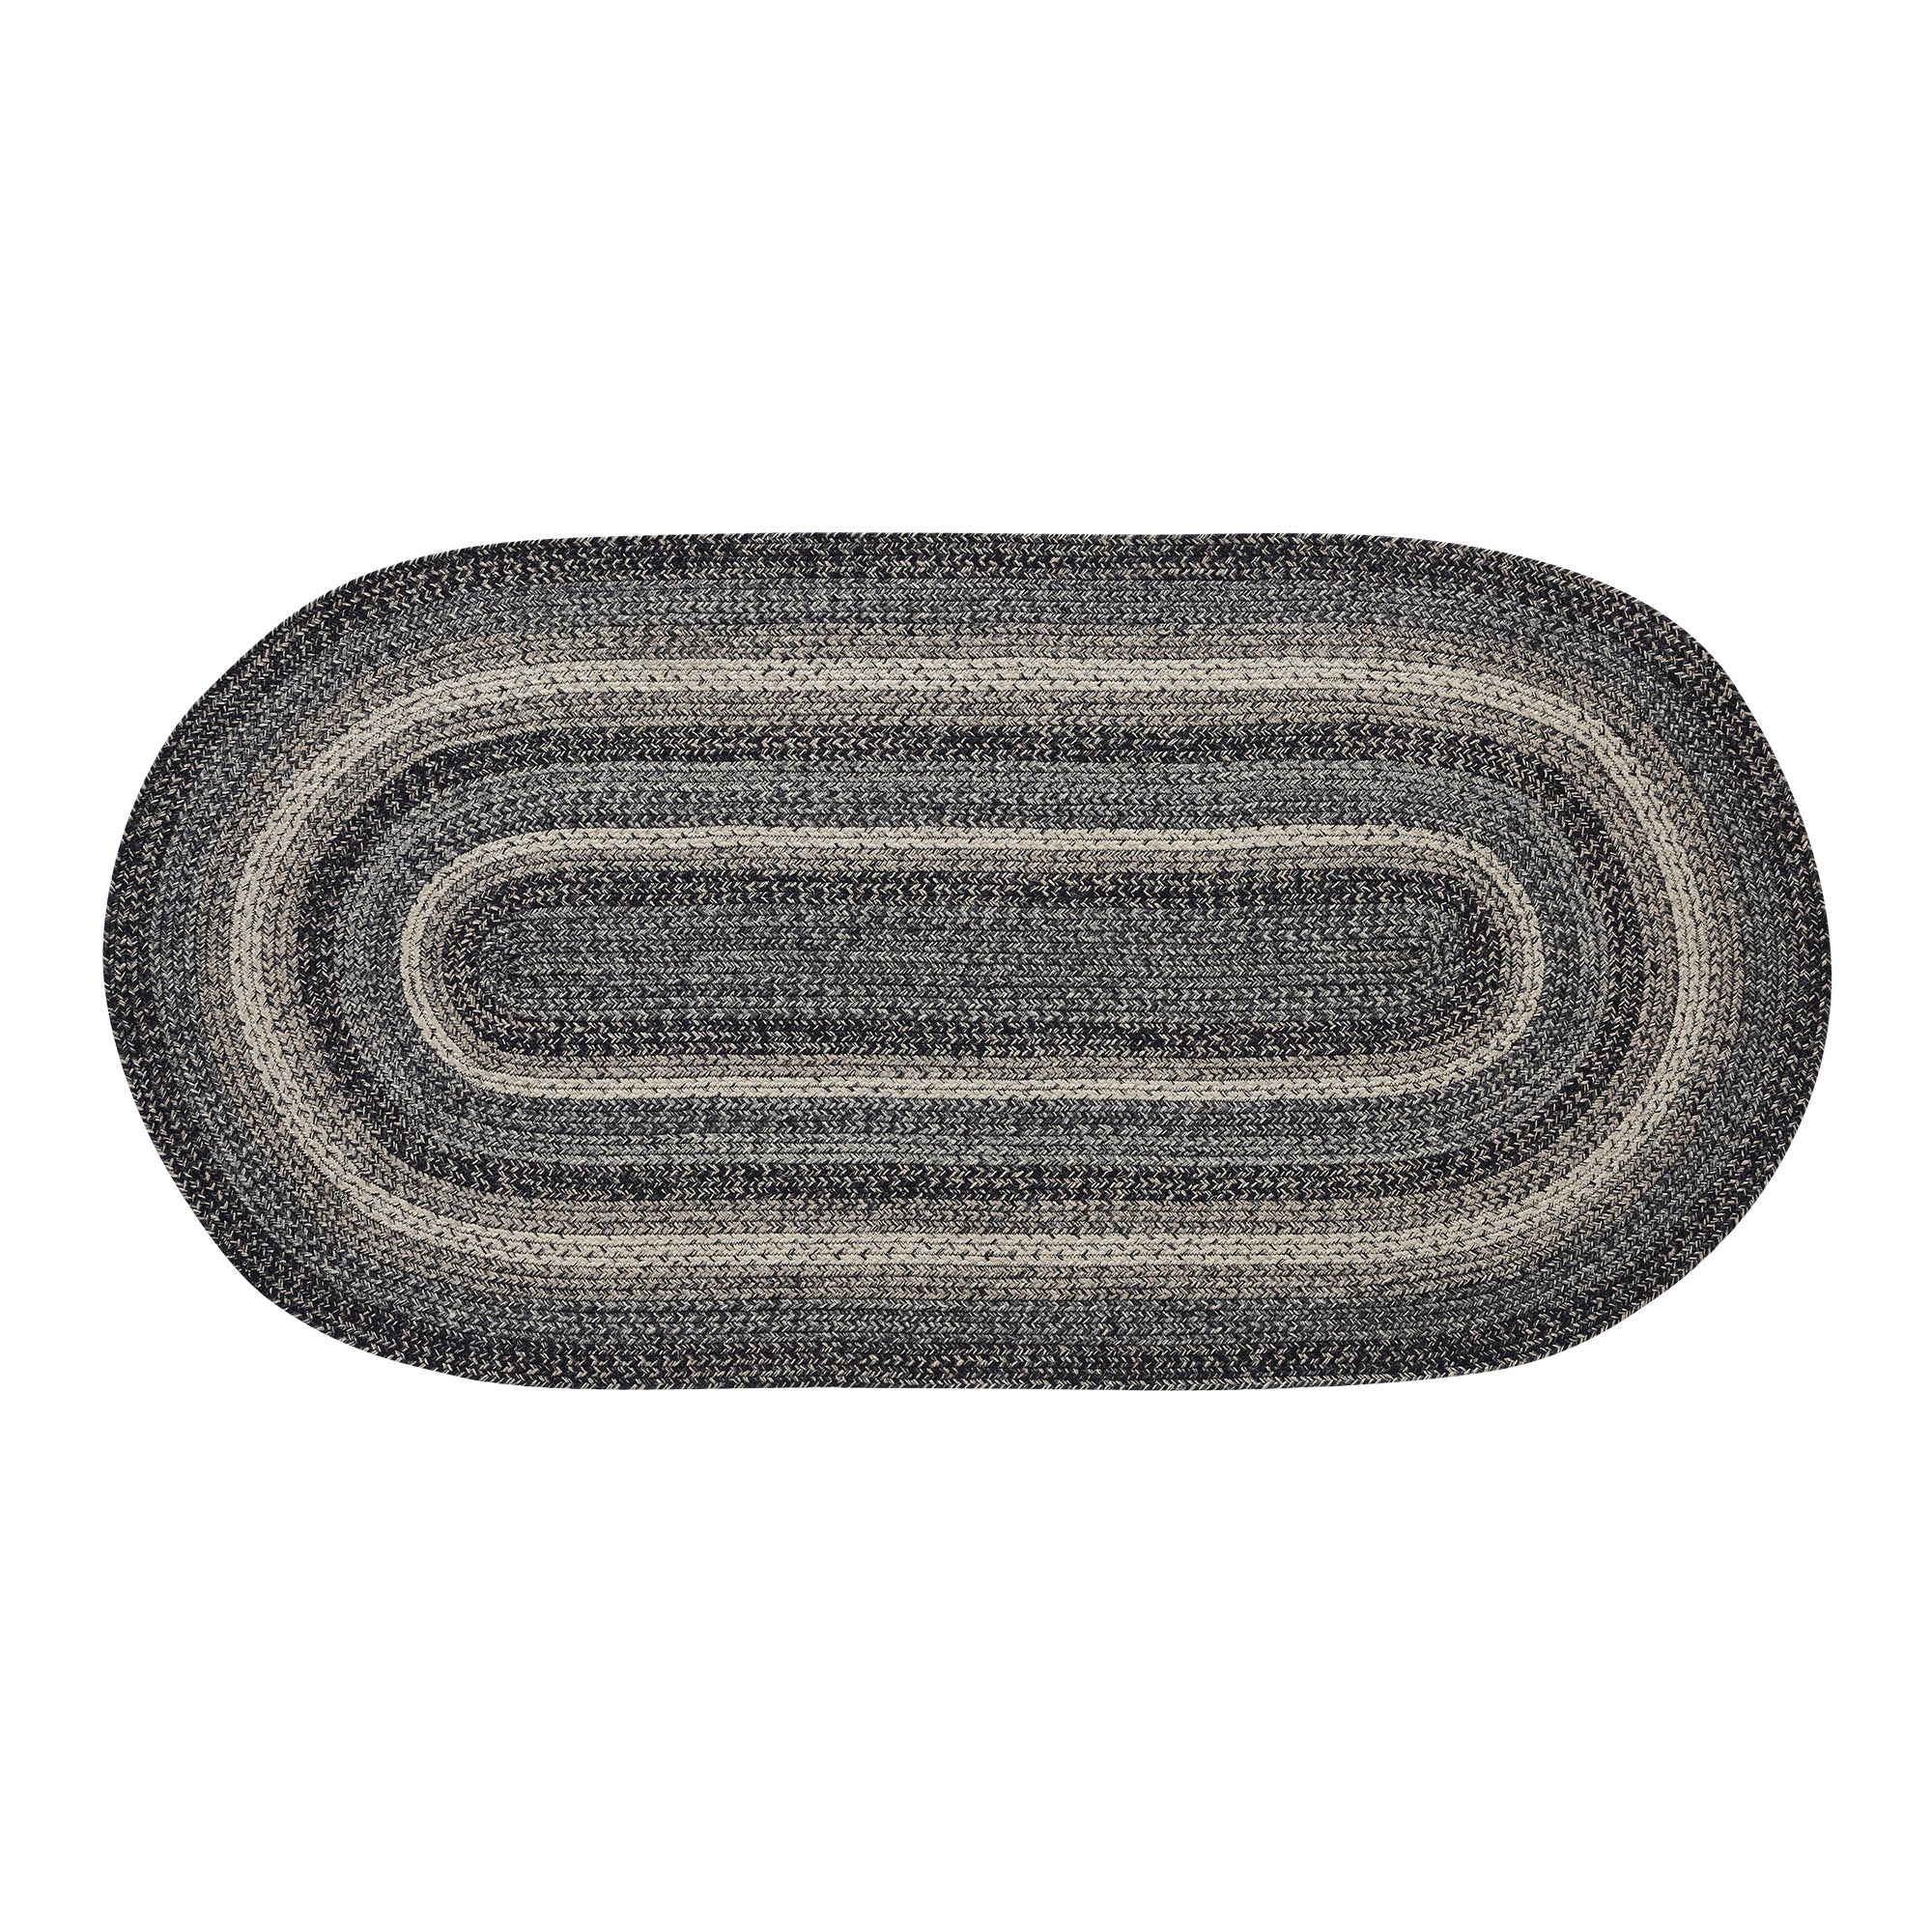 Sawyer Mill Black and Gray Braided Rug with Included Rug Pad